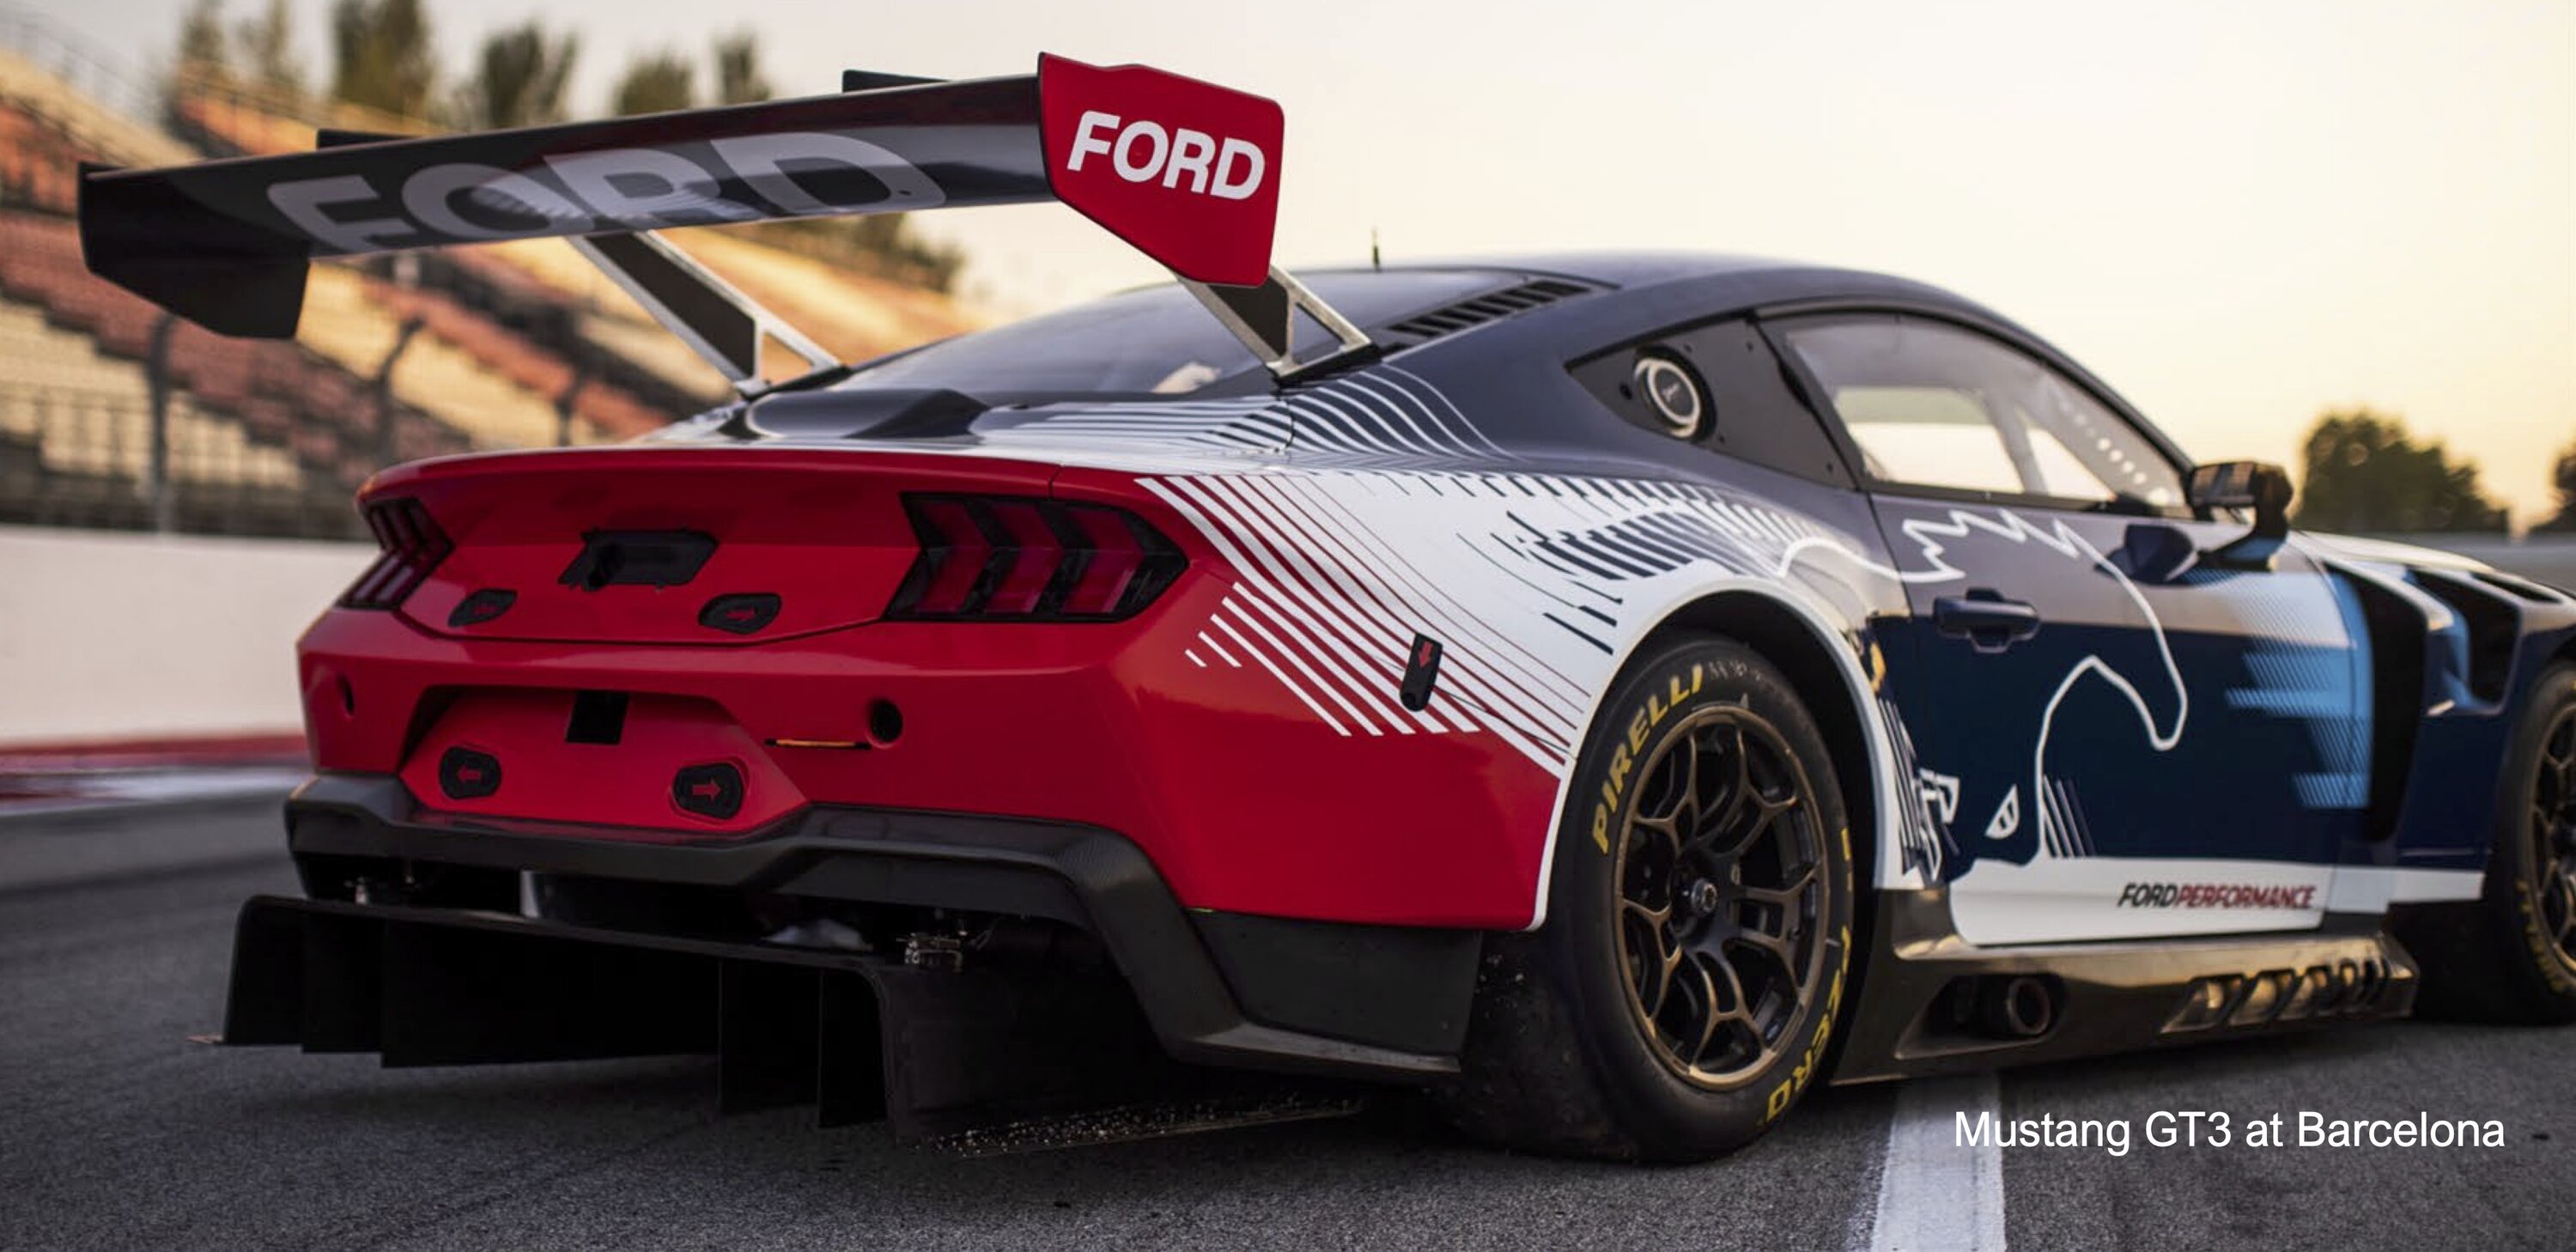 S650 Mustang GT3 Mustang Production Increased to Meet 'Very High' Demand gt3 @ barcelona